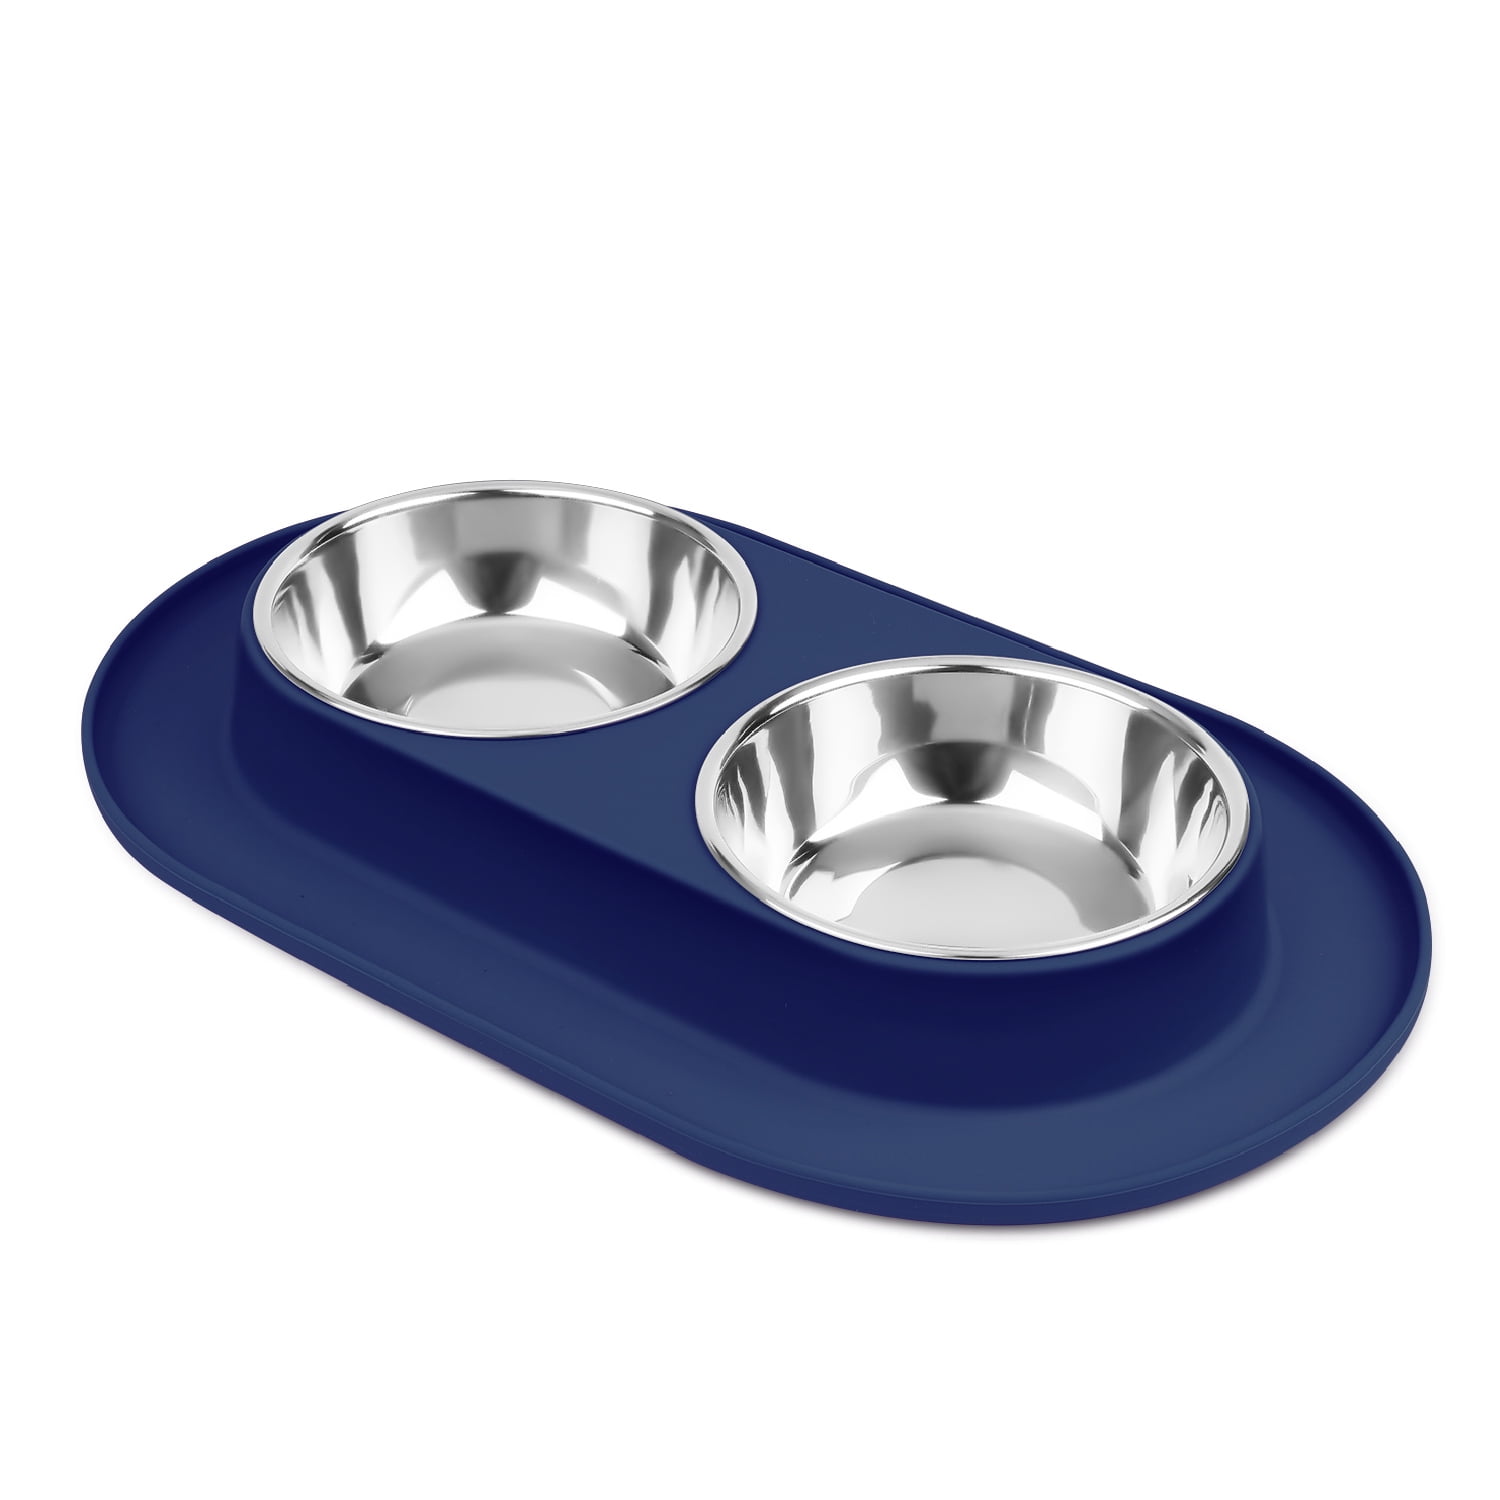 Flexzion flexzion elevated dog bowl - raised dog bowls for medium dogs  removable stainless steel dog food and water bowl - non-skid do